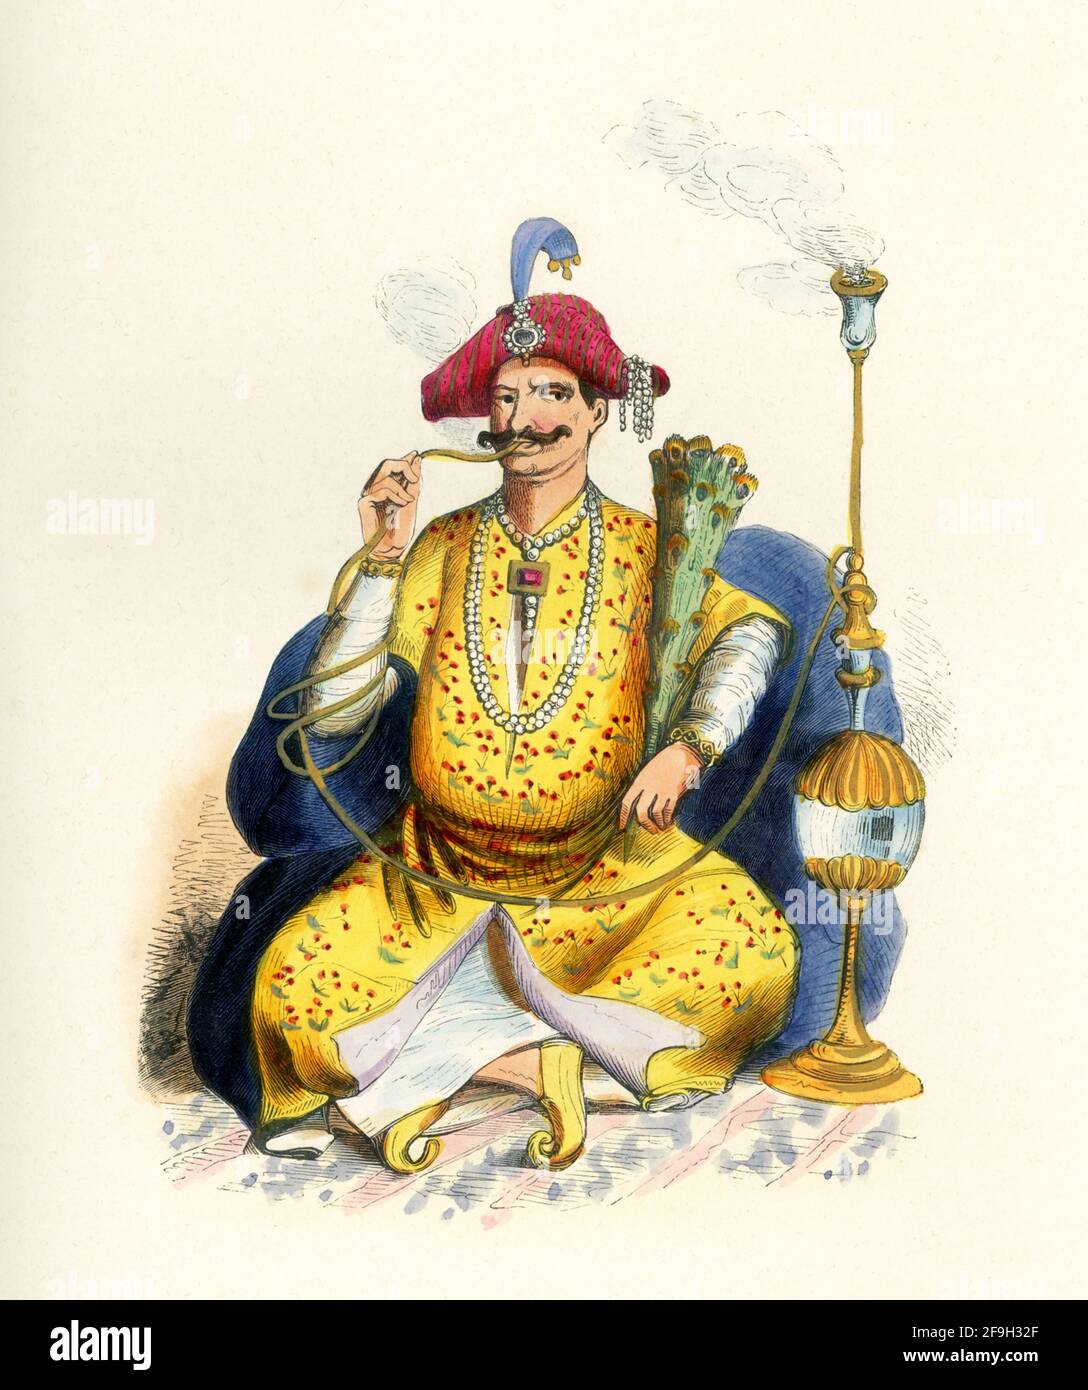 This 1840s illustration shows a rajah. Raja (also spelled rajah) is a royal title used for Indian monarchs. The title is equivalent to king or princely ruler in the Indian subcontinent and Southeast Asia. Stock Photo